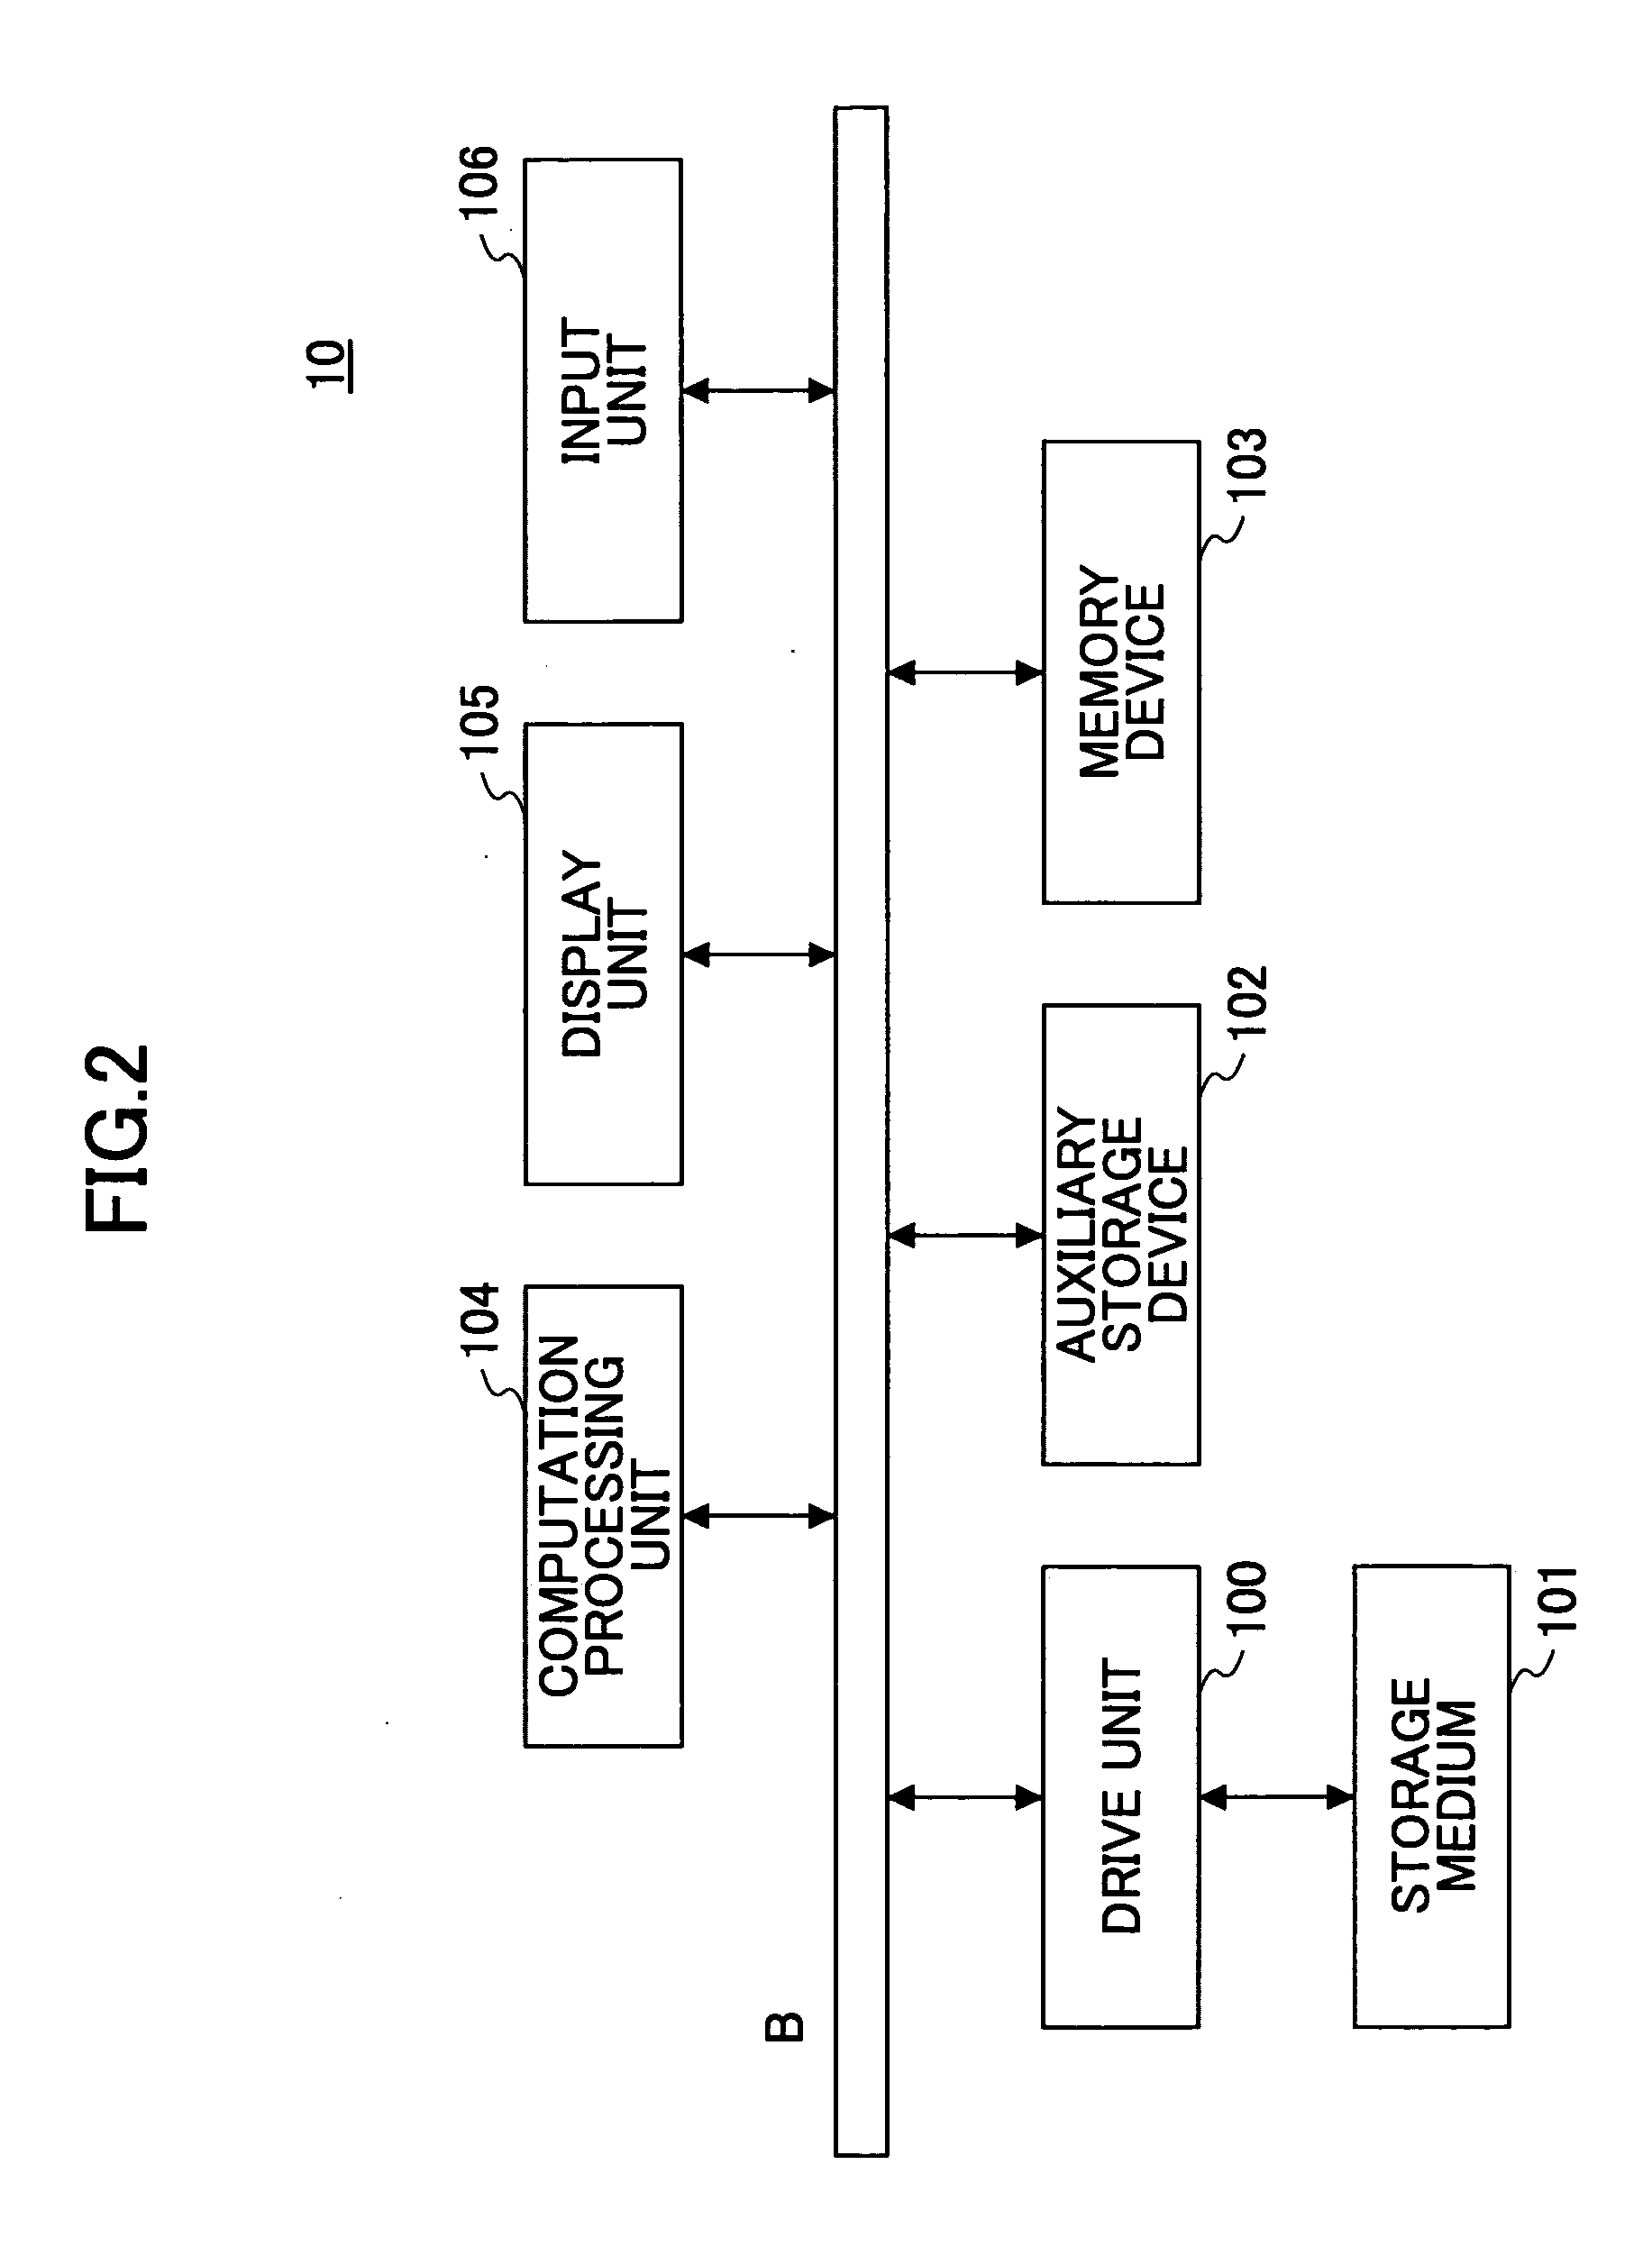 Image processing method and image processing program product